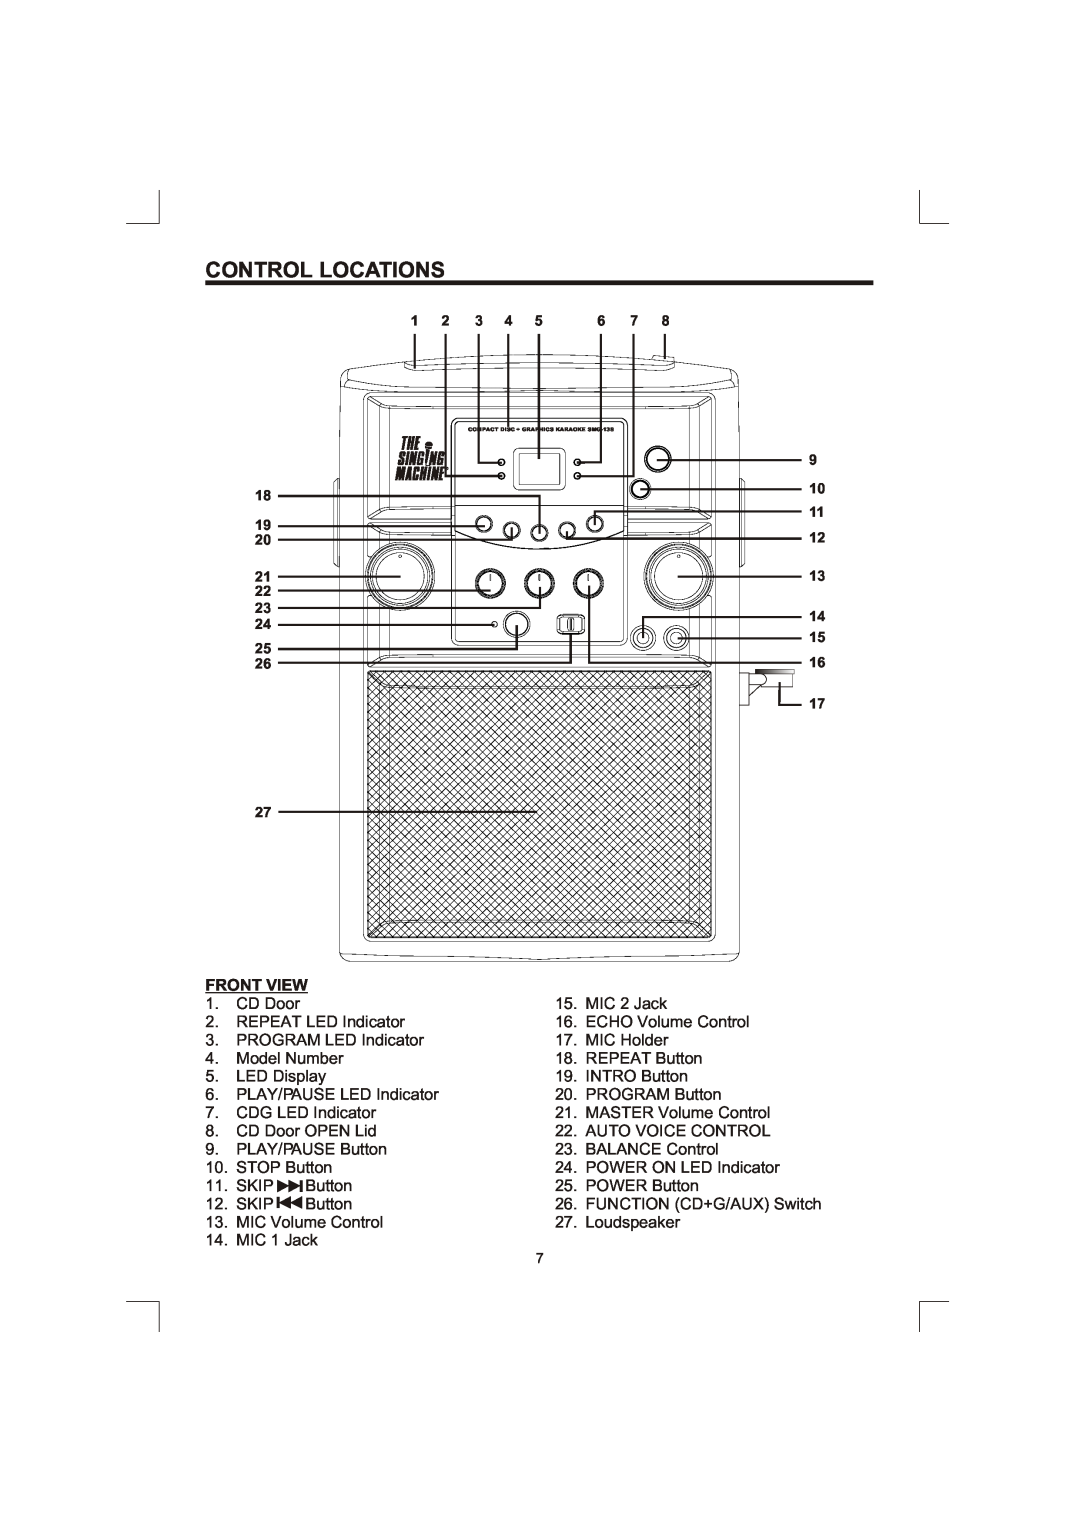 The Singing Machine SMG-138 owner manual Control Locations, Front View 